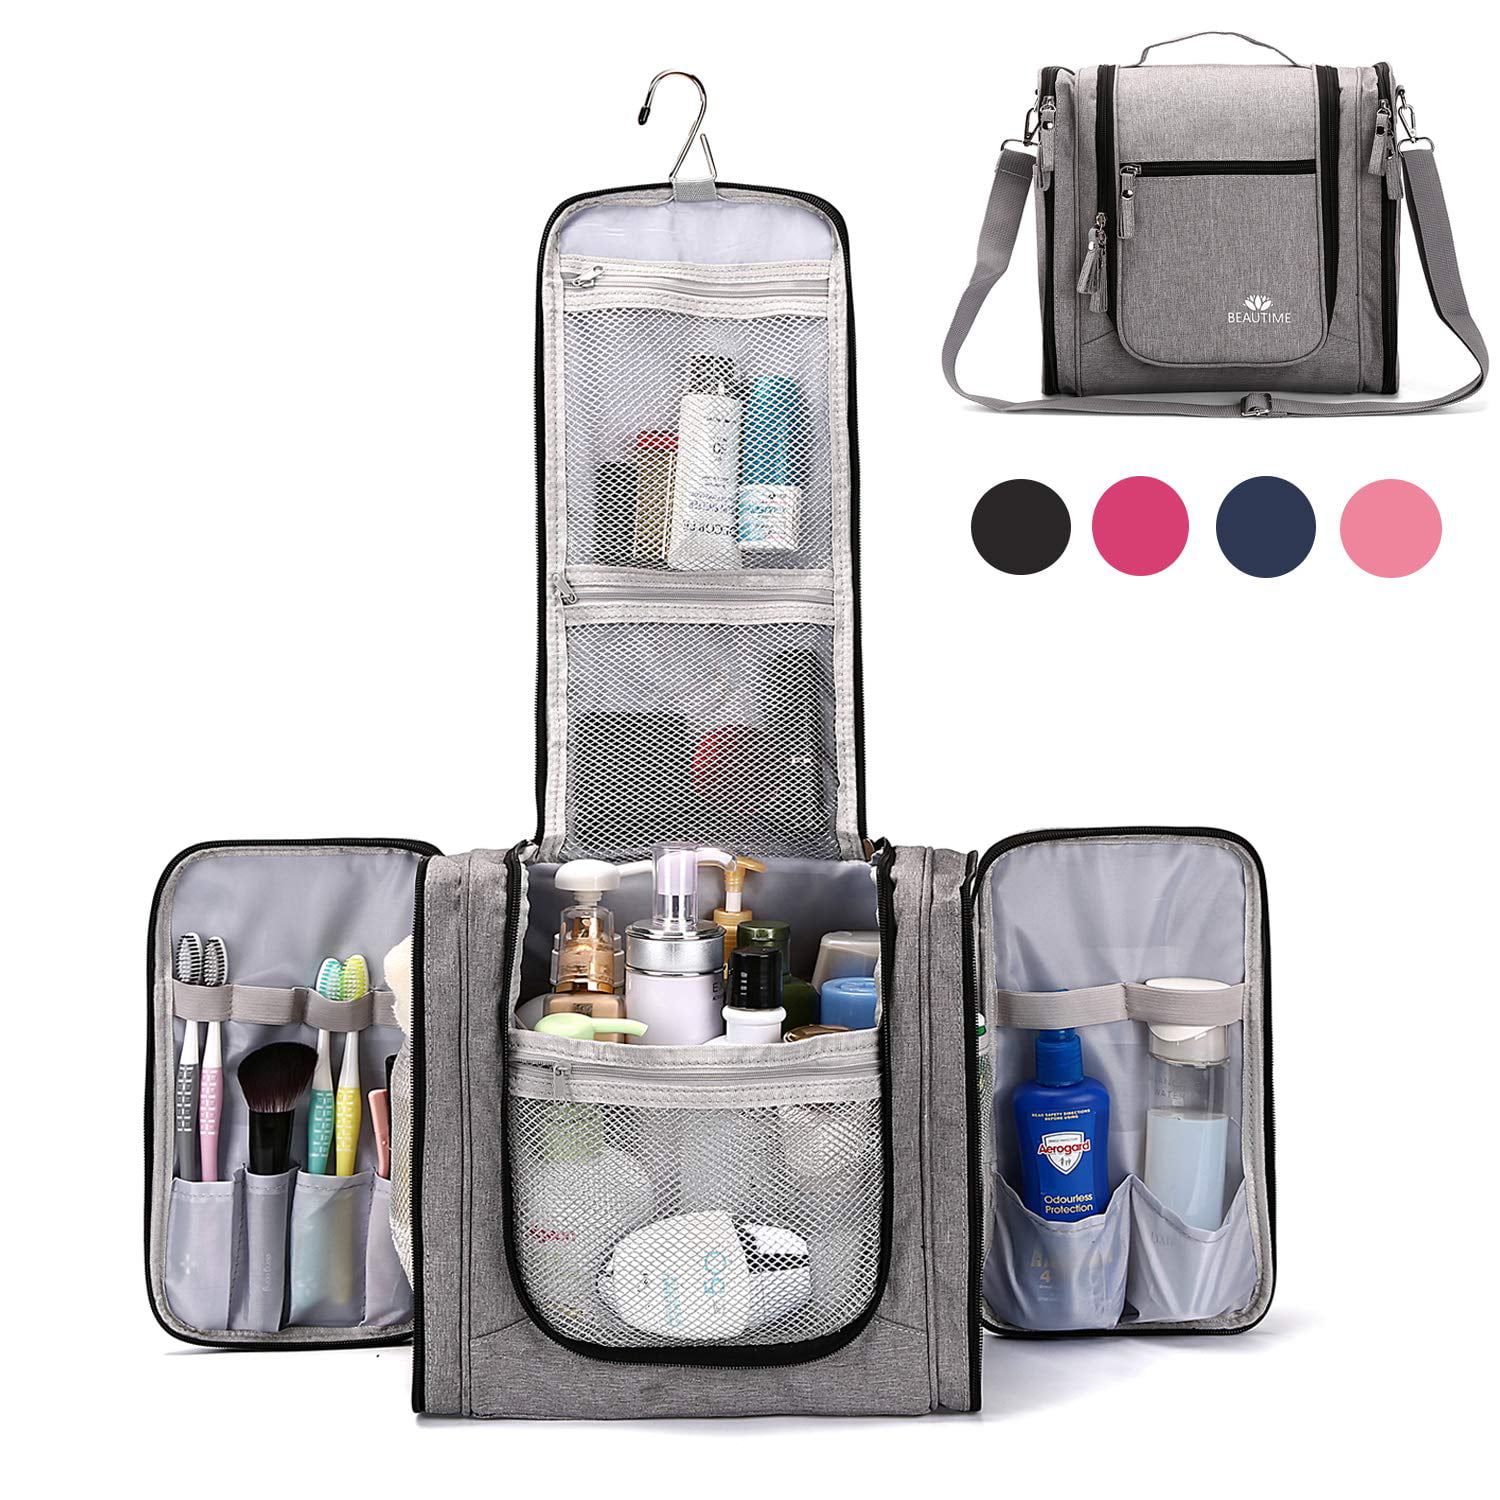 personalized travel bag organizer wash bag dopp kits toiletry bags cables cord organizer